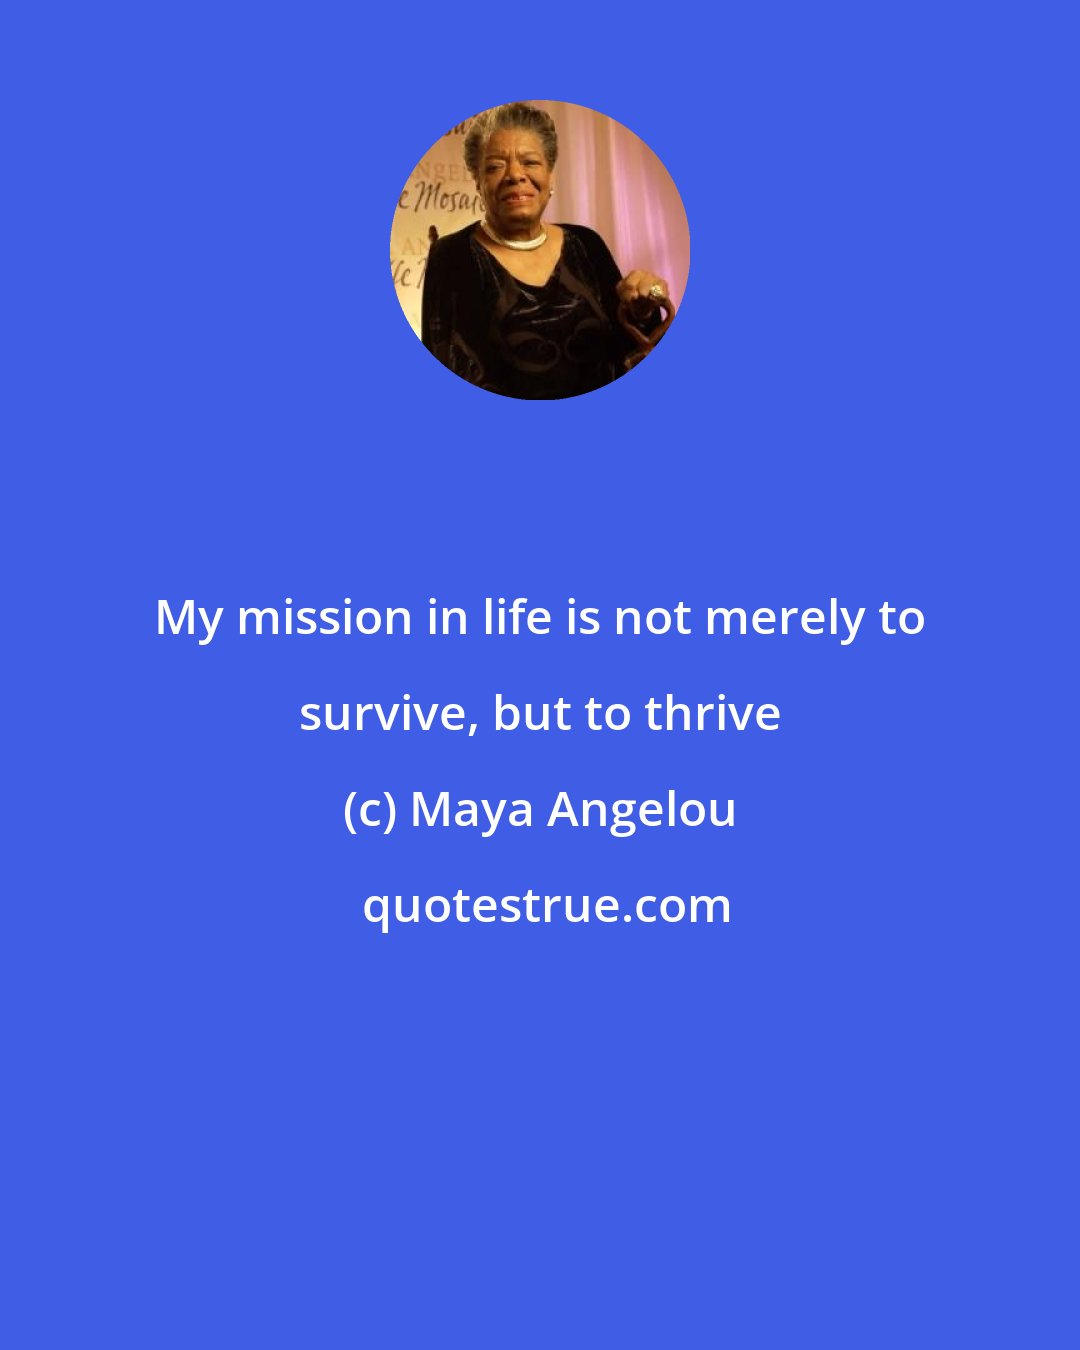 Maya Angelou: My mission in life is not merely to survive, but to thrive